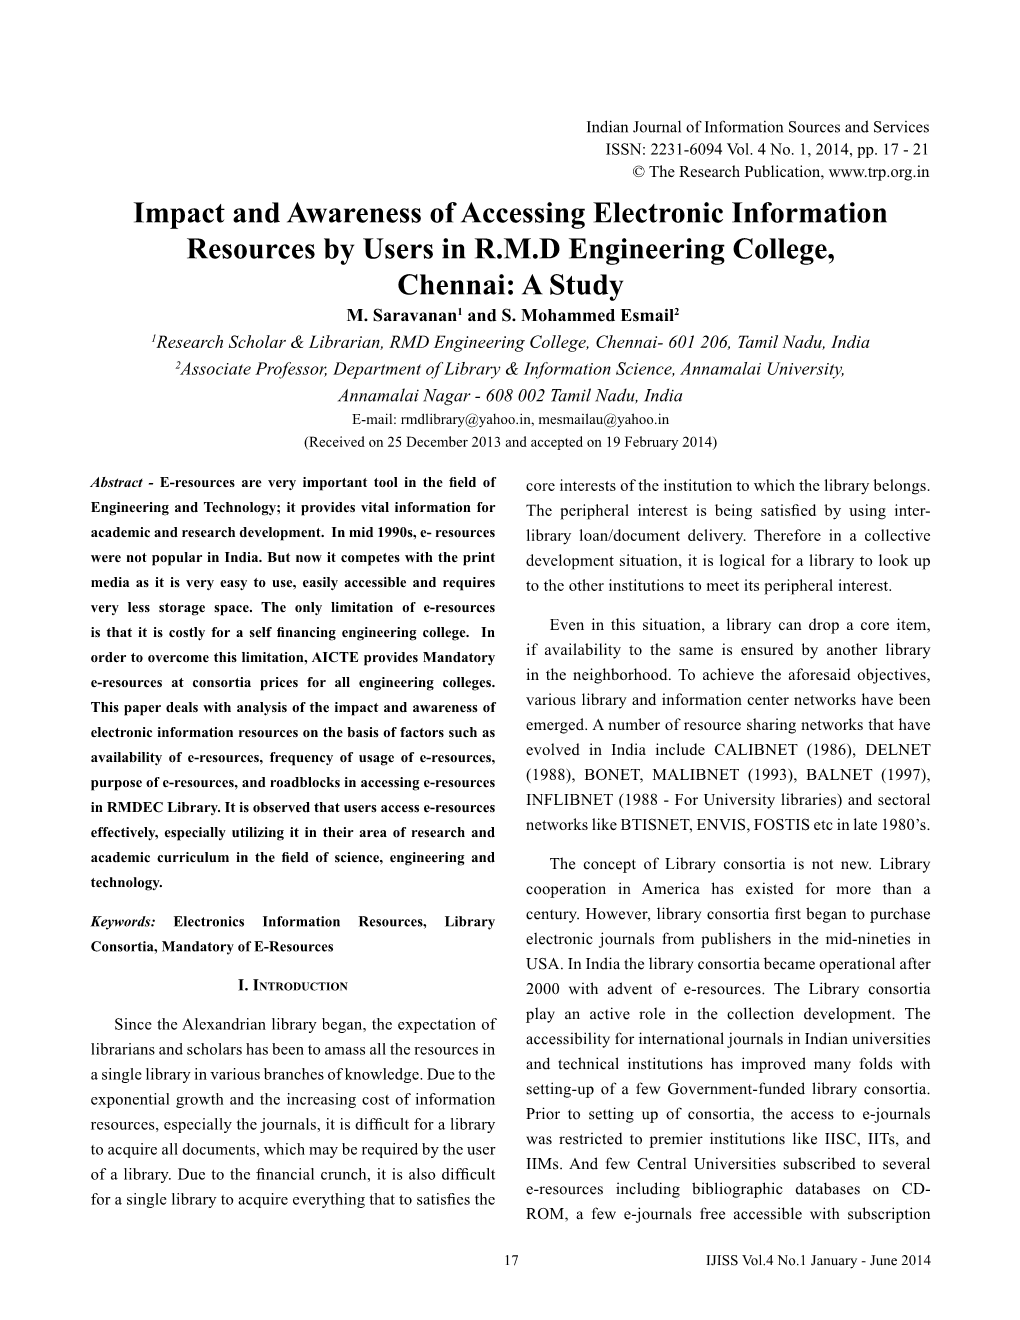 Impact and Awareness of Accessing Electronic Information Resources by Users in R.M.D Engineering College, Chennai: a Study M